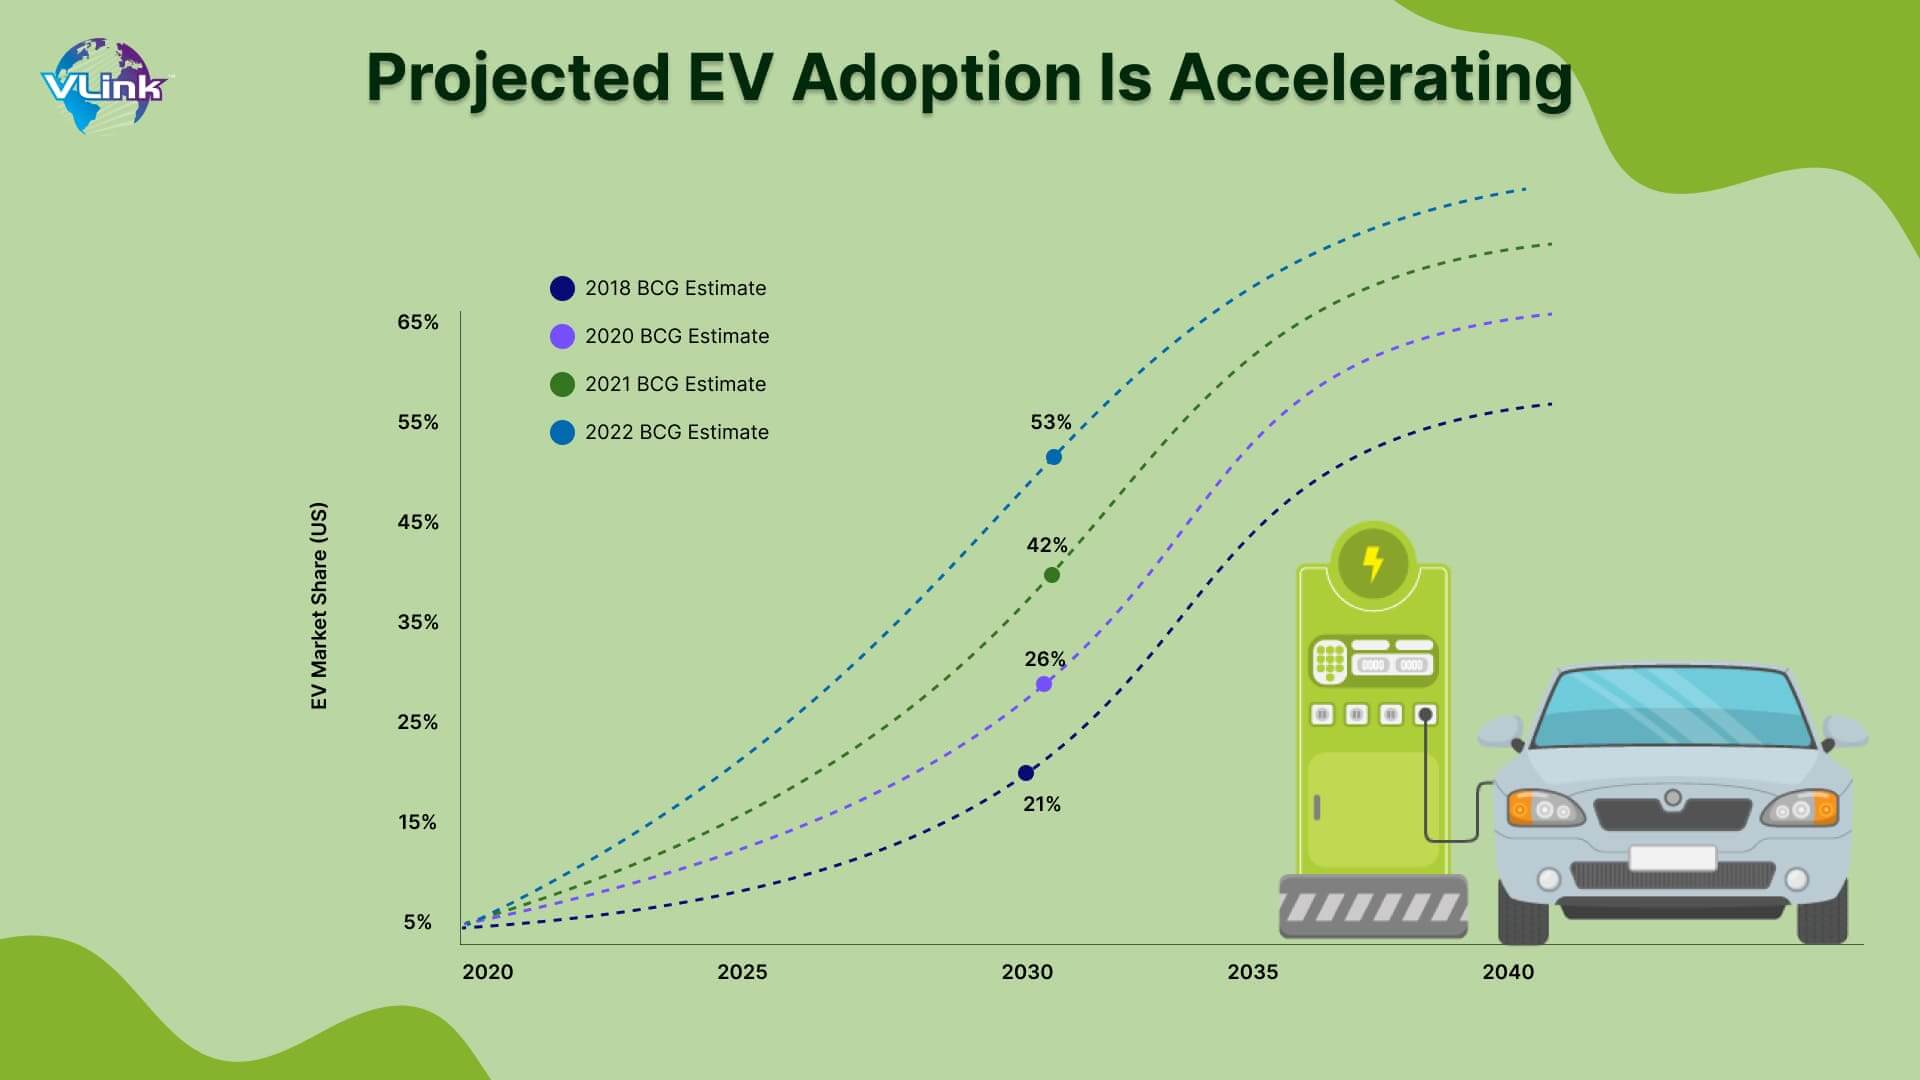 Project EV Adoption is Accelerating